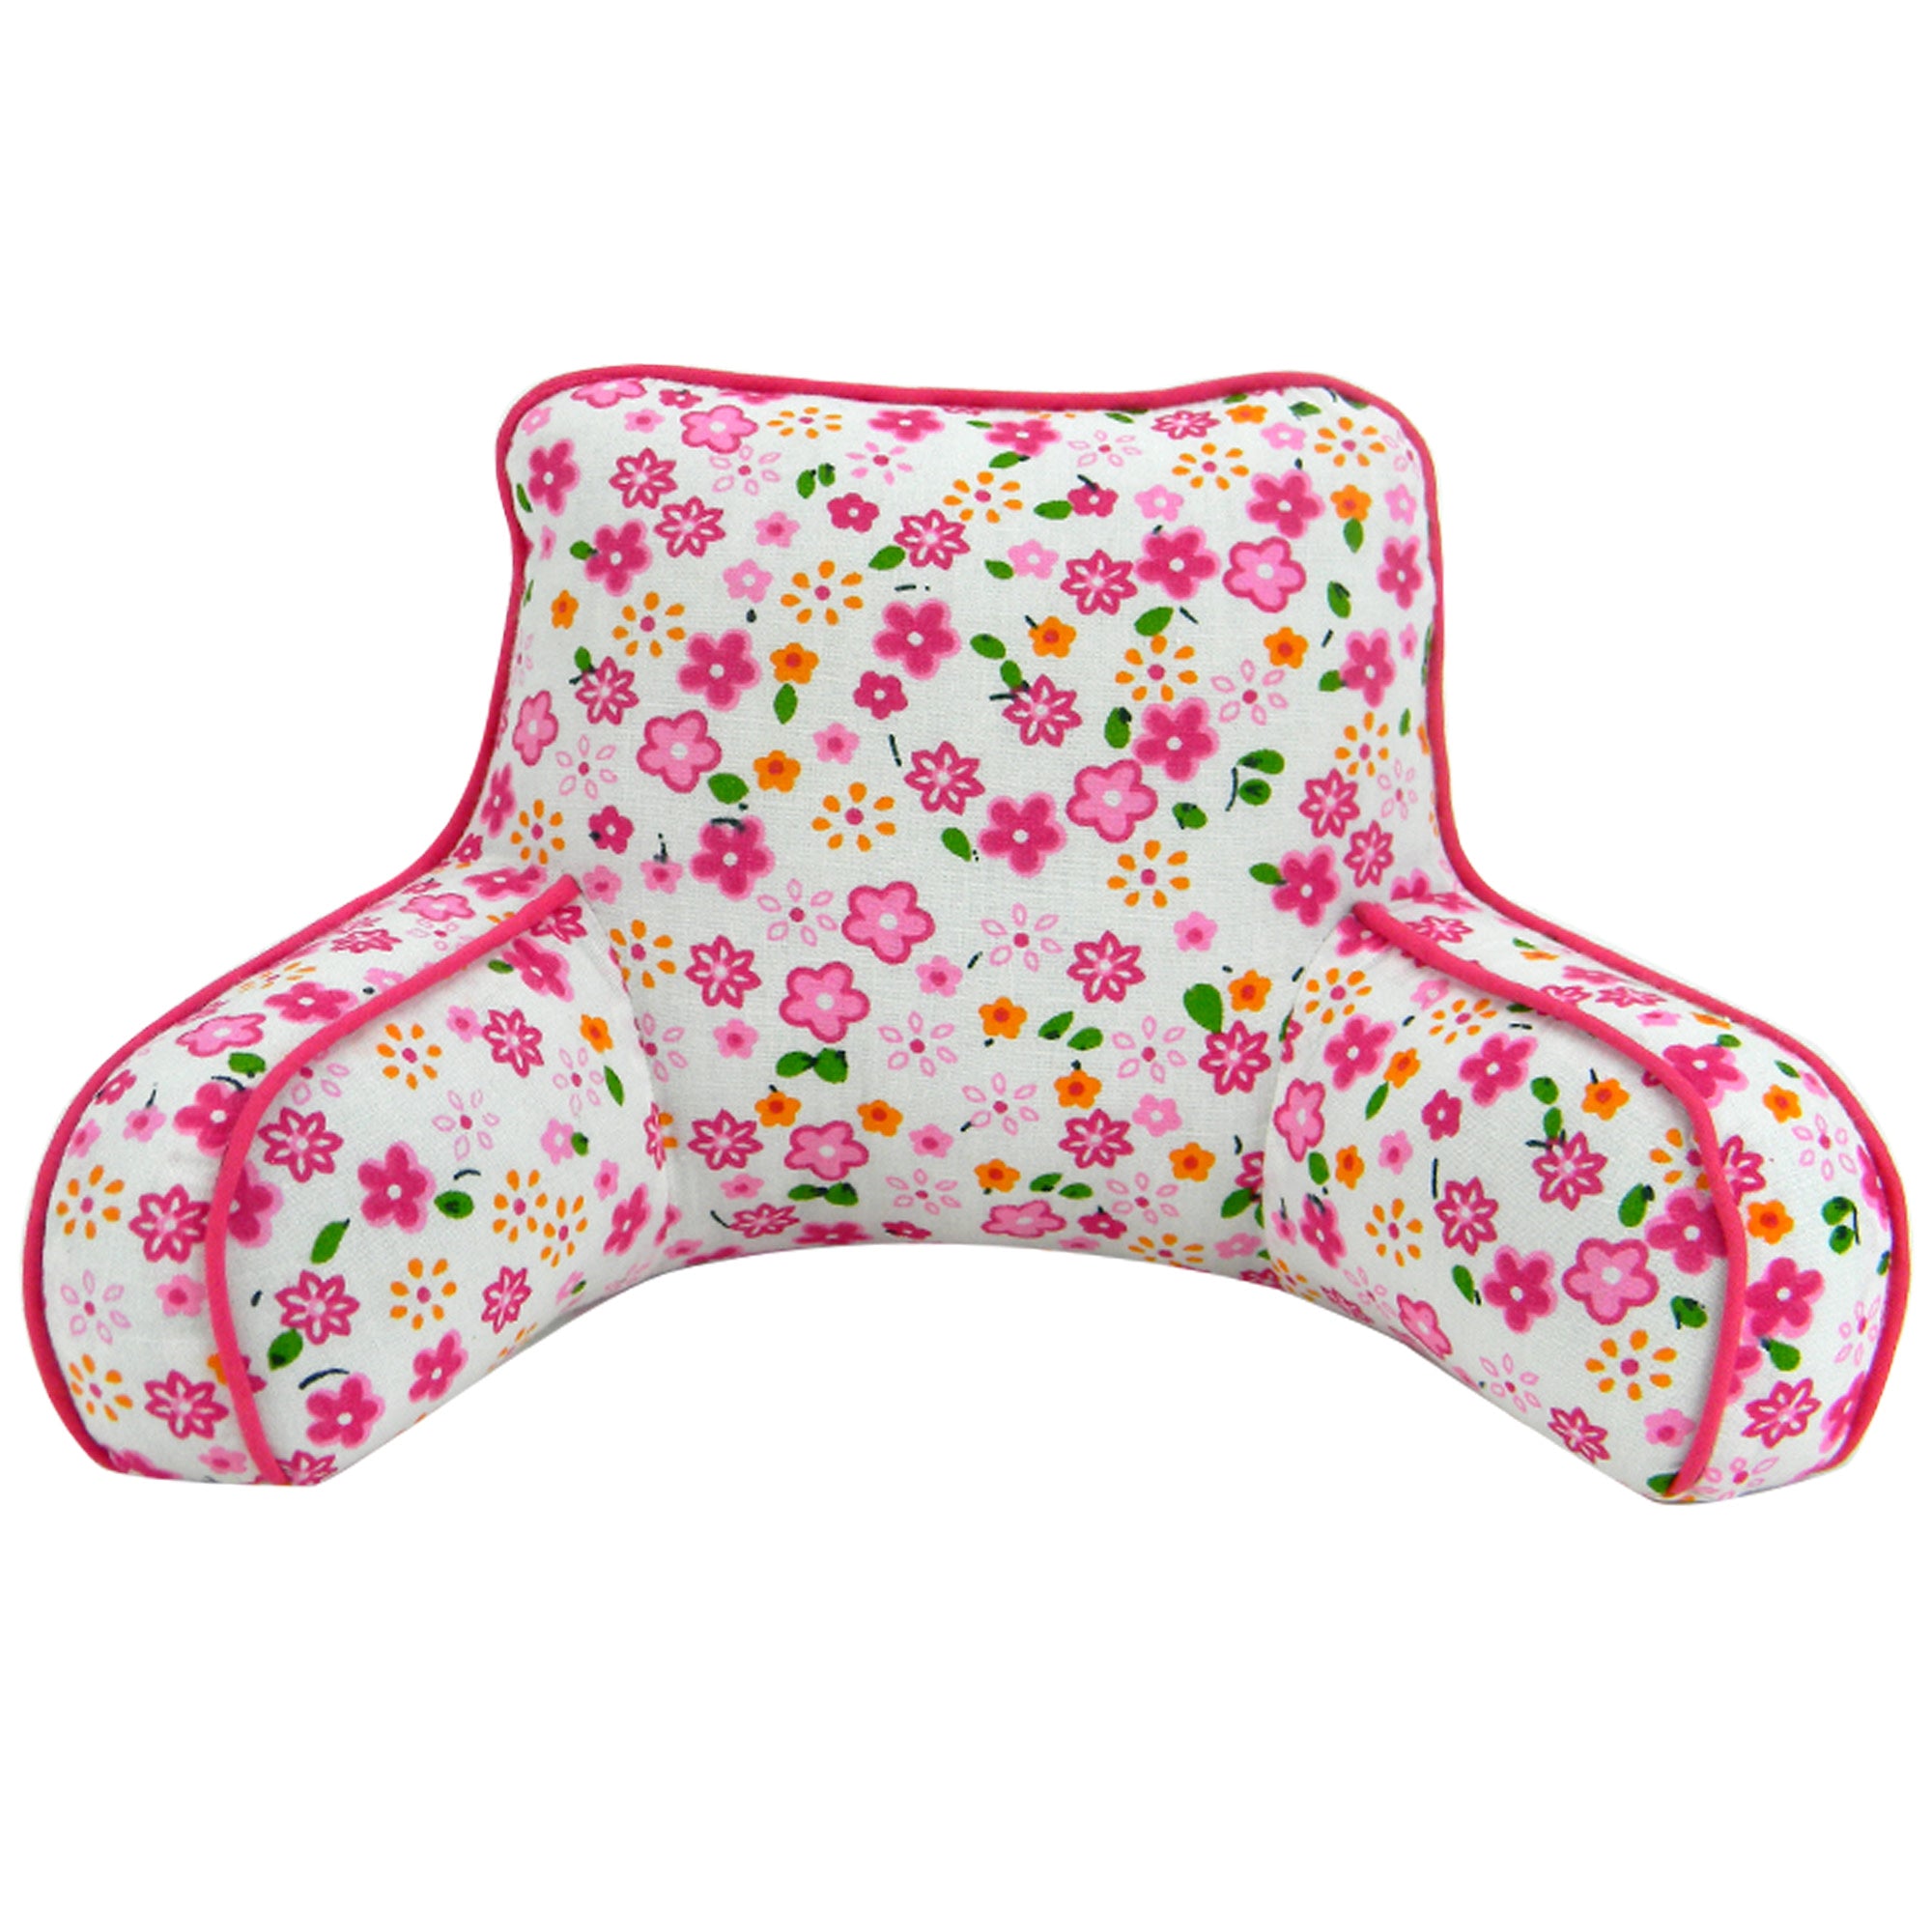 Sophia’s Flower Power Floral Print Back Rest Pillow with Stylish Piping Details Doll Bedroom Décor for 18” Dolls, Hot Pink